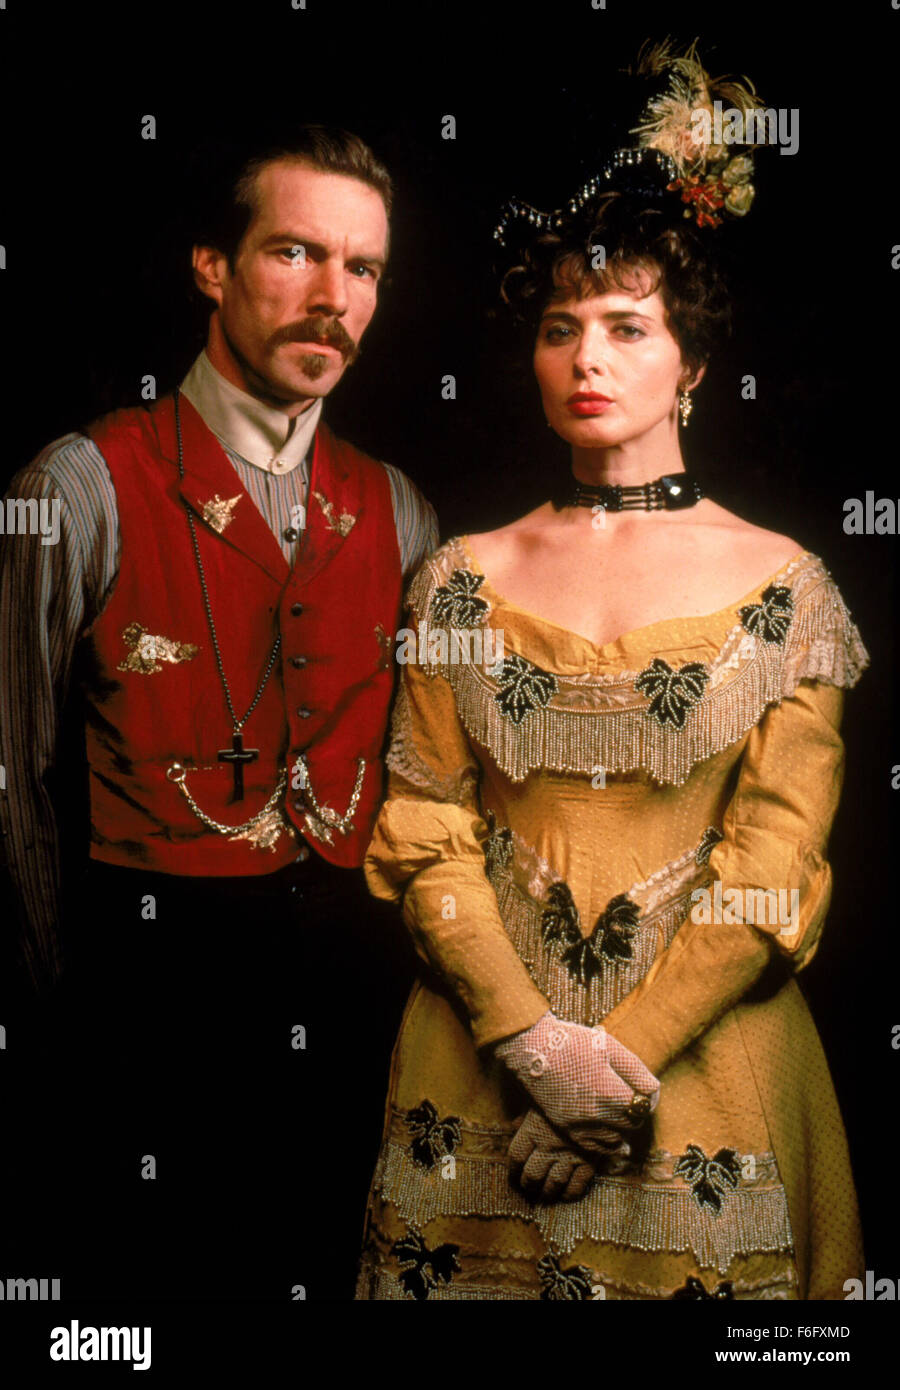 RELEASE DATE: June 1994. MOVIE TITLE: Wyatt Earp. STUDIO: Tig Productions. PLOT: Wyatt Earp is a movie about a man and his family. More of a documentary than Hollywood tinsel, this movie shows us the good times and the bad times of one of the West's greatest heros. PICTURED: DENNIS QUAID as Doc Holliday, ISABELLA ROSSELLINI as Big Nose Kate. Stock Photo